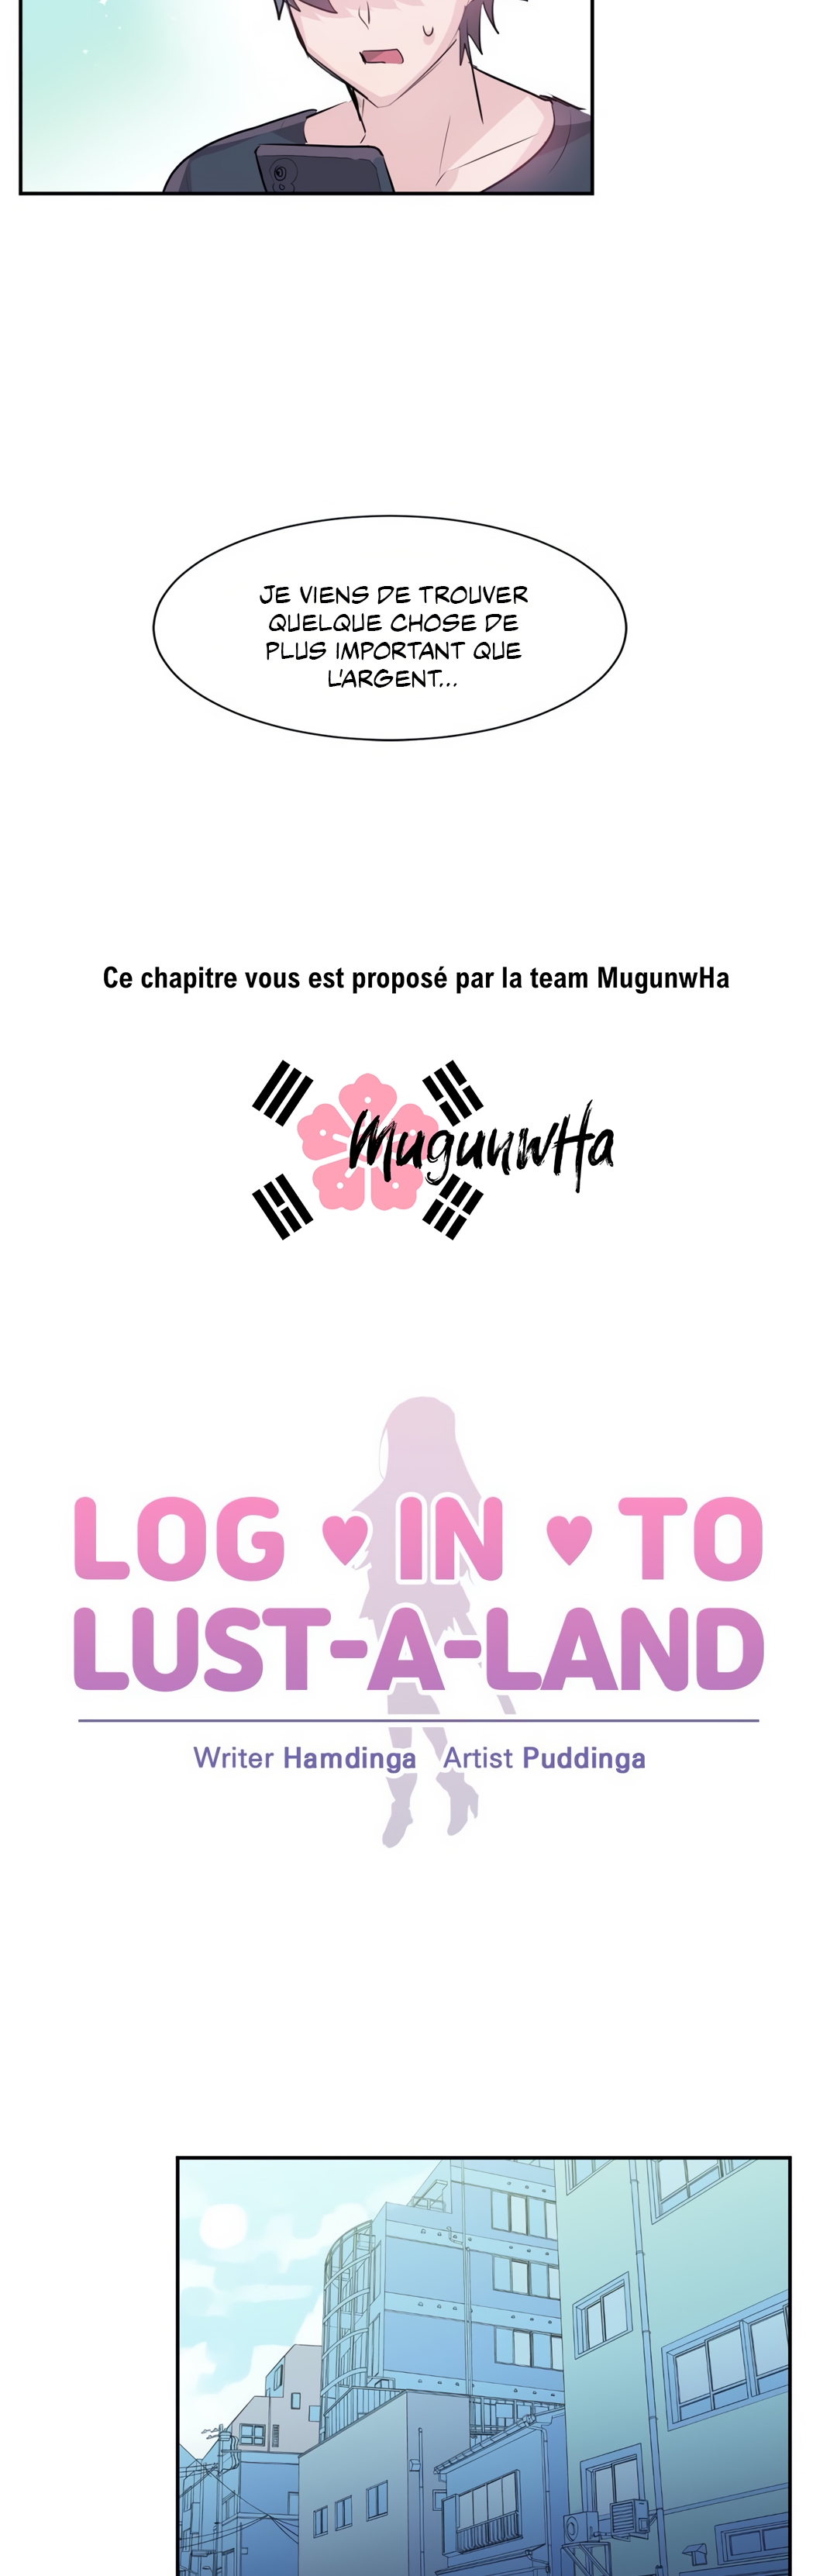 Log in to Lust-a-land VF Chapitre 1 à 5 numero d'image 76